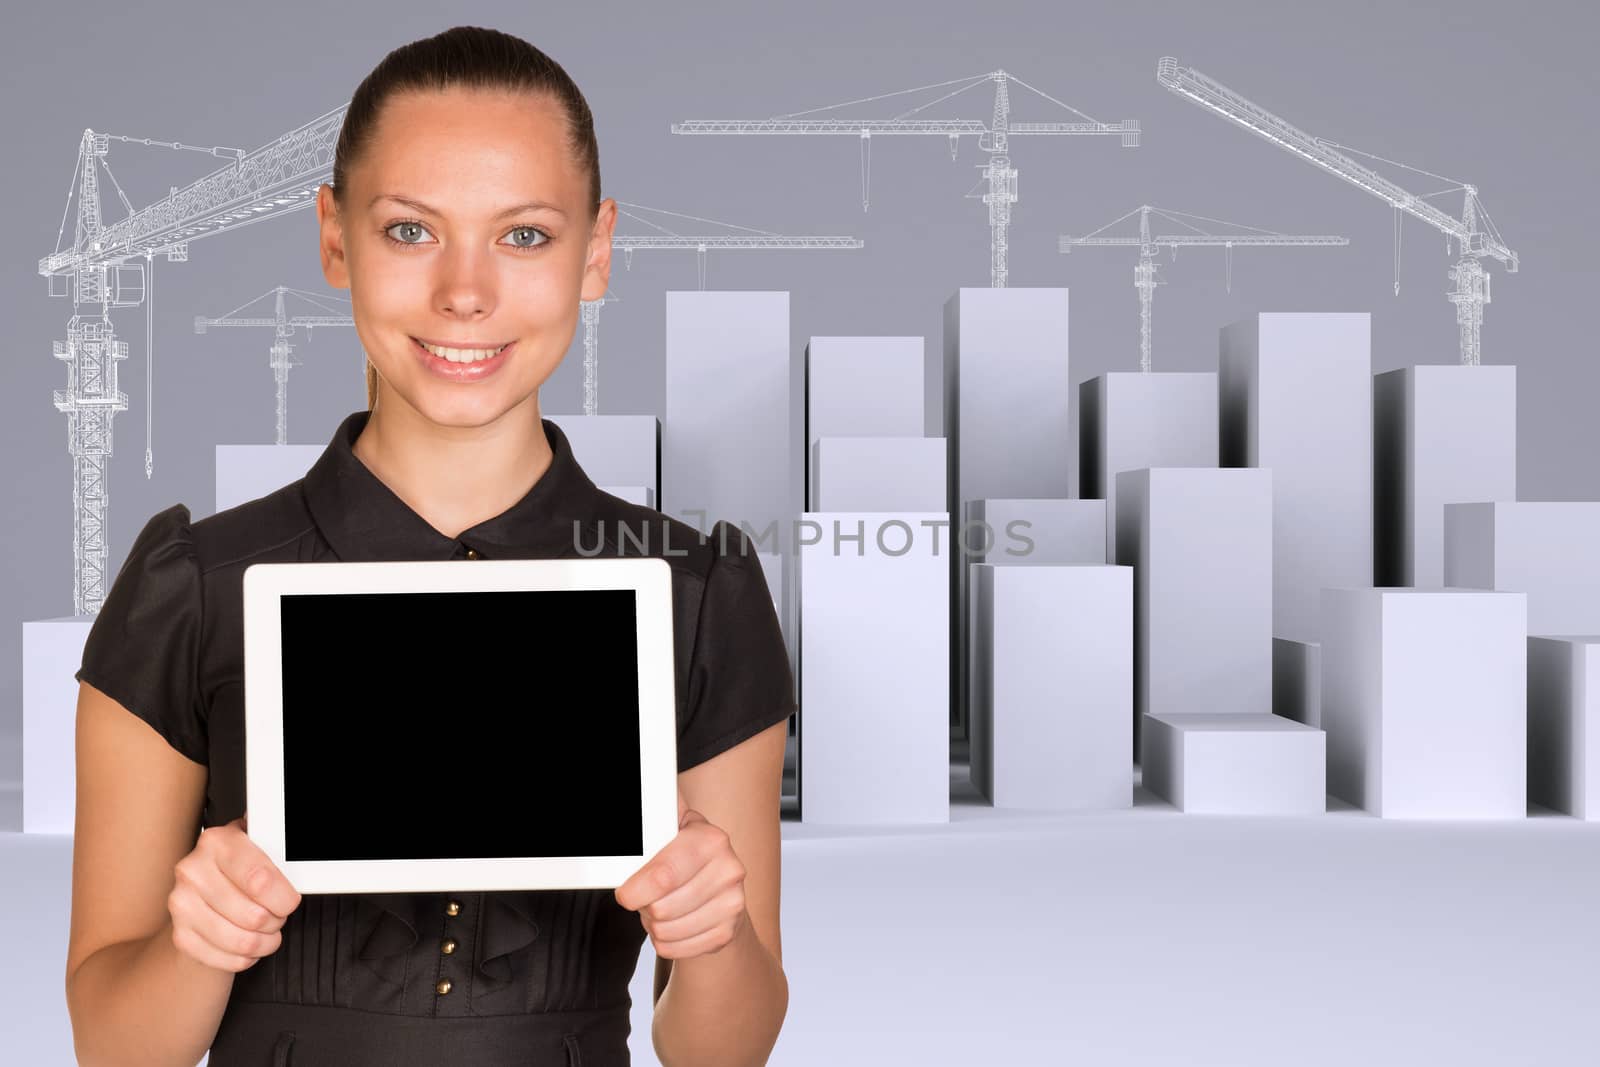 Smiling young woman with teeth smile holding tablet and looking at camera on abstract background 